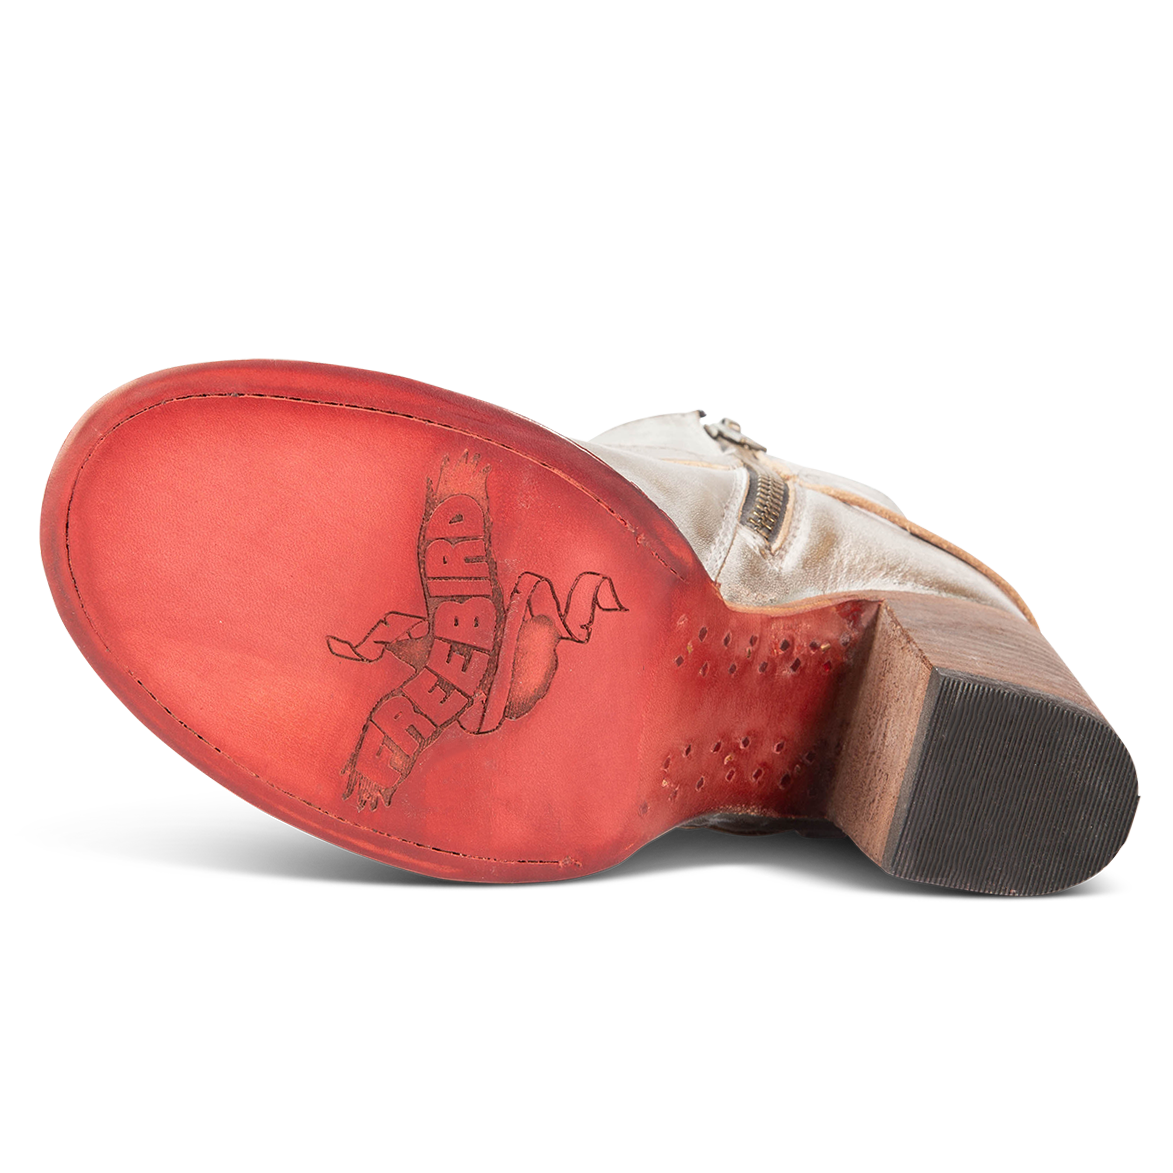 Red leather sole imprinted with FREEBIRD on women's Bolo ice ankle bootie